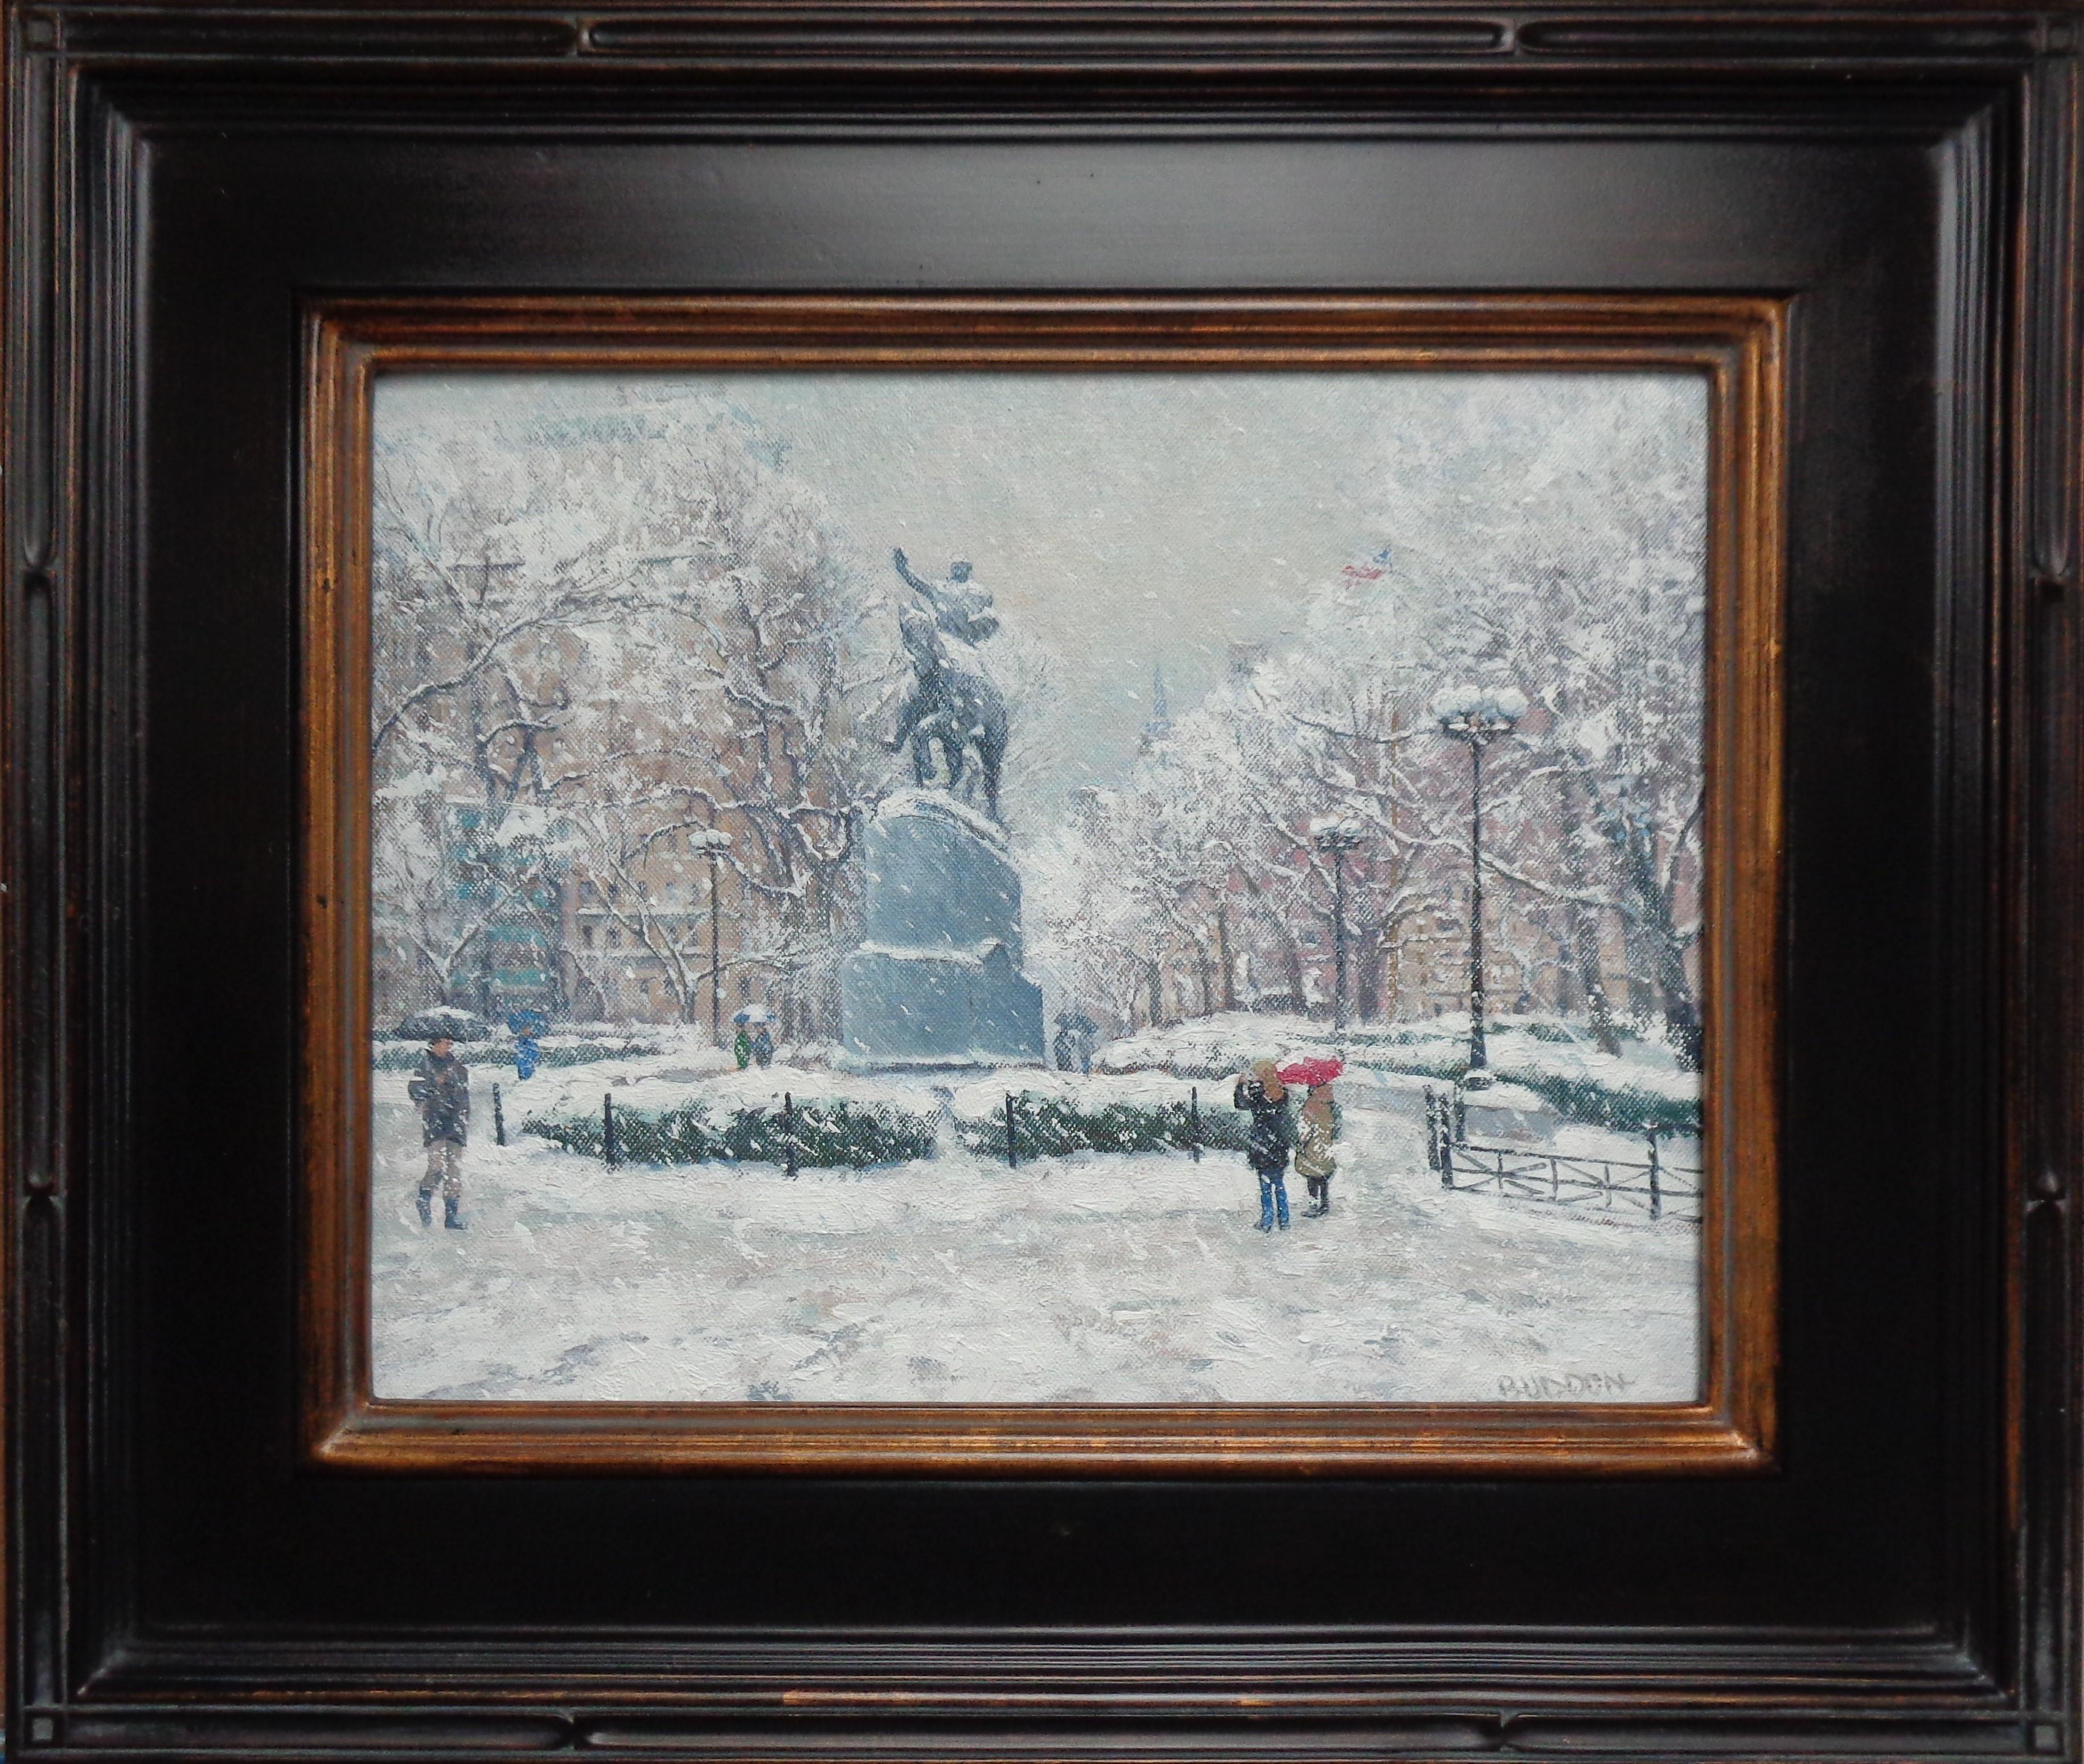  New York City Winter Snow Painting Michael Budden Winter At Union Square Park